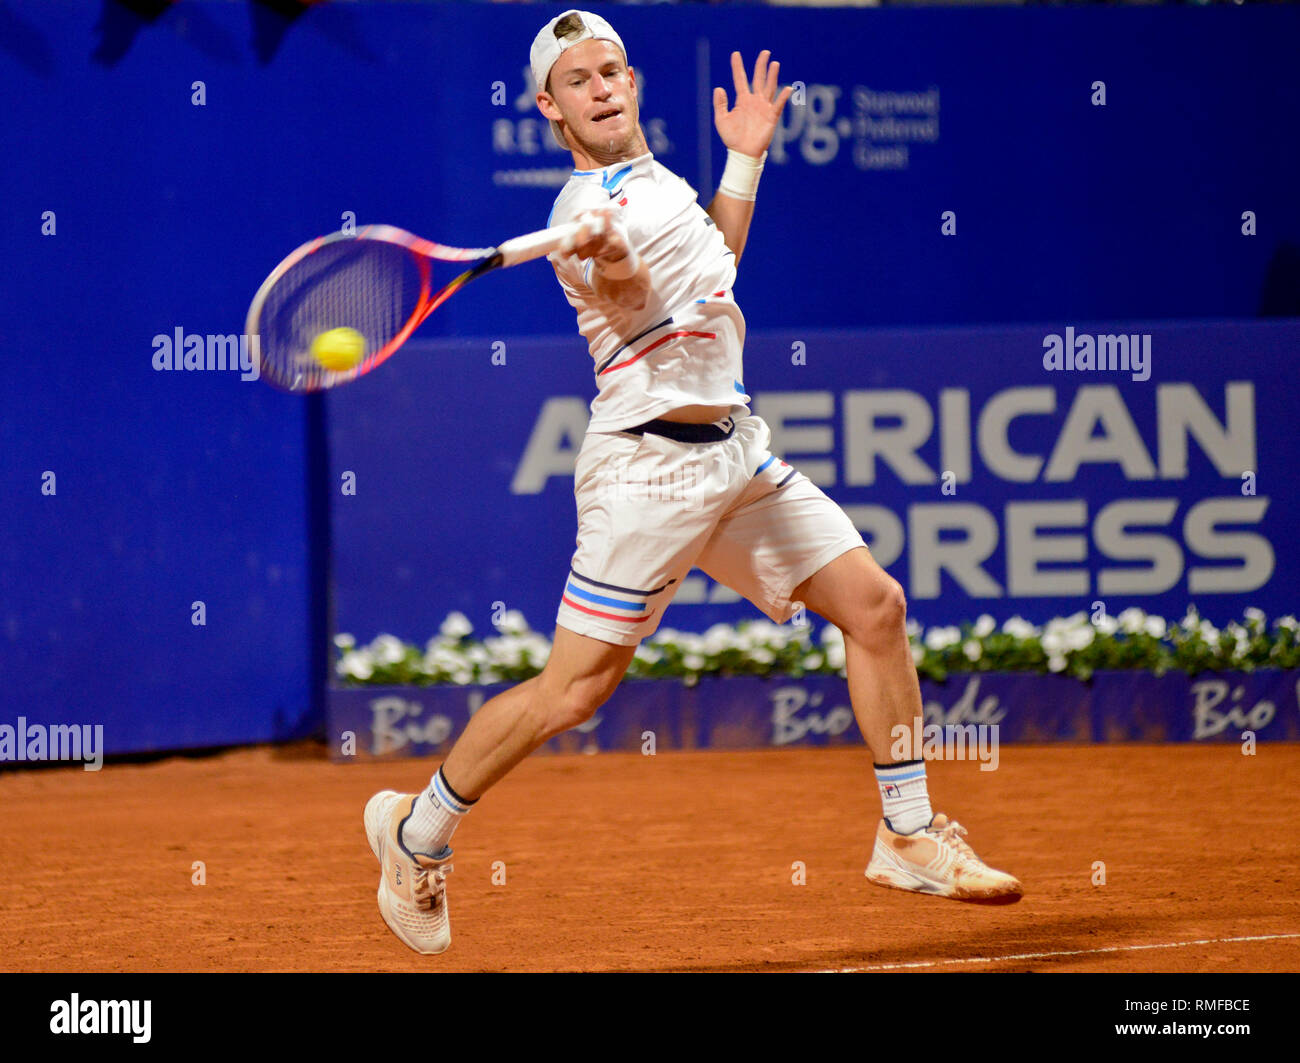 Buenos Aires, Argentina. 14th Feb 2019. Local favourite Diego Schwartzman (Argentina) advances to the next round of the Argentina Open, an ATP 250 tennis tournament. Credit: Mariano Garcia/Alamy Live News Stock Photo